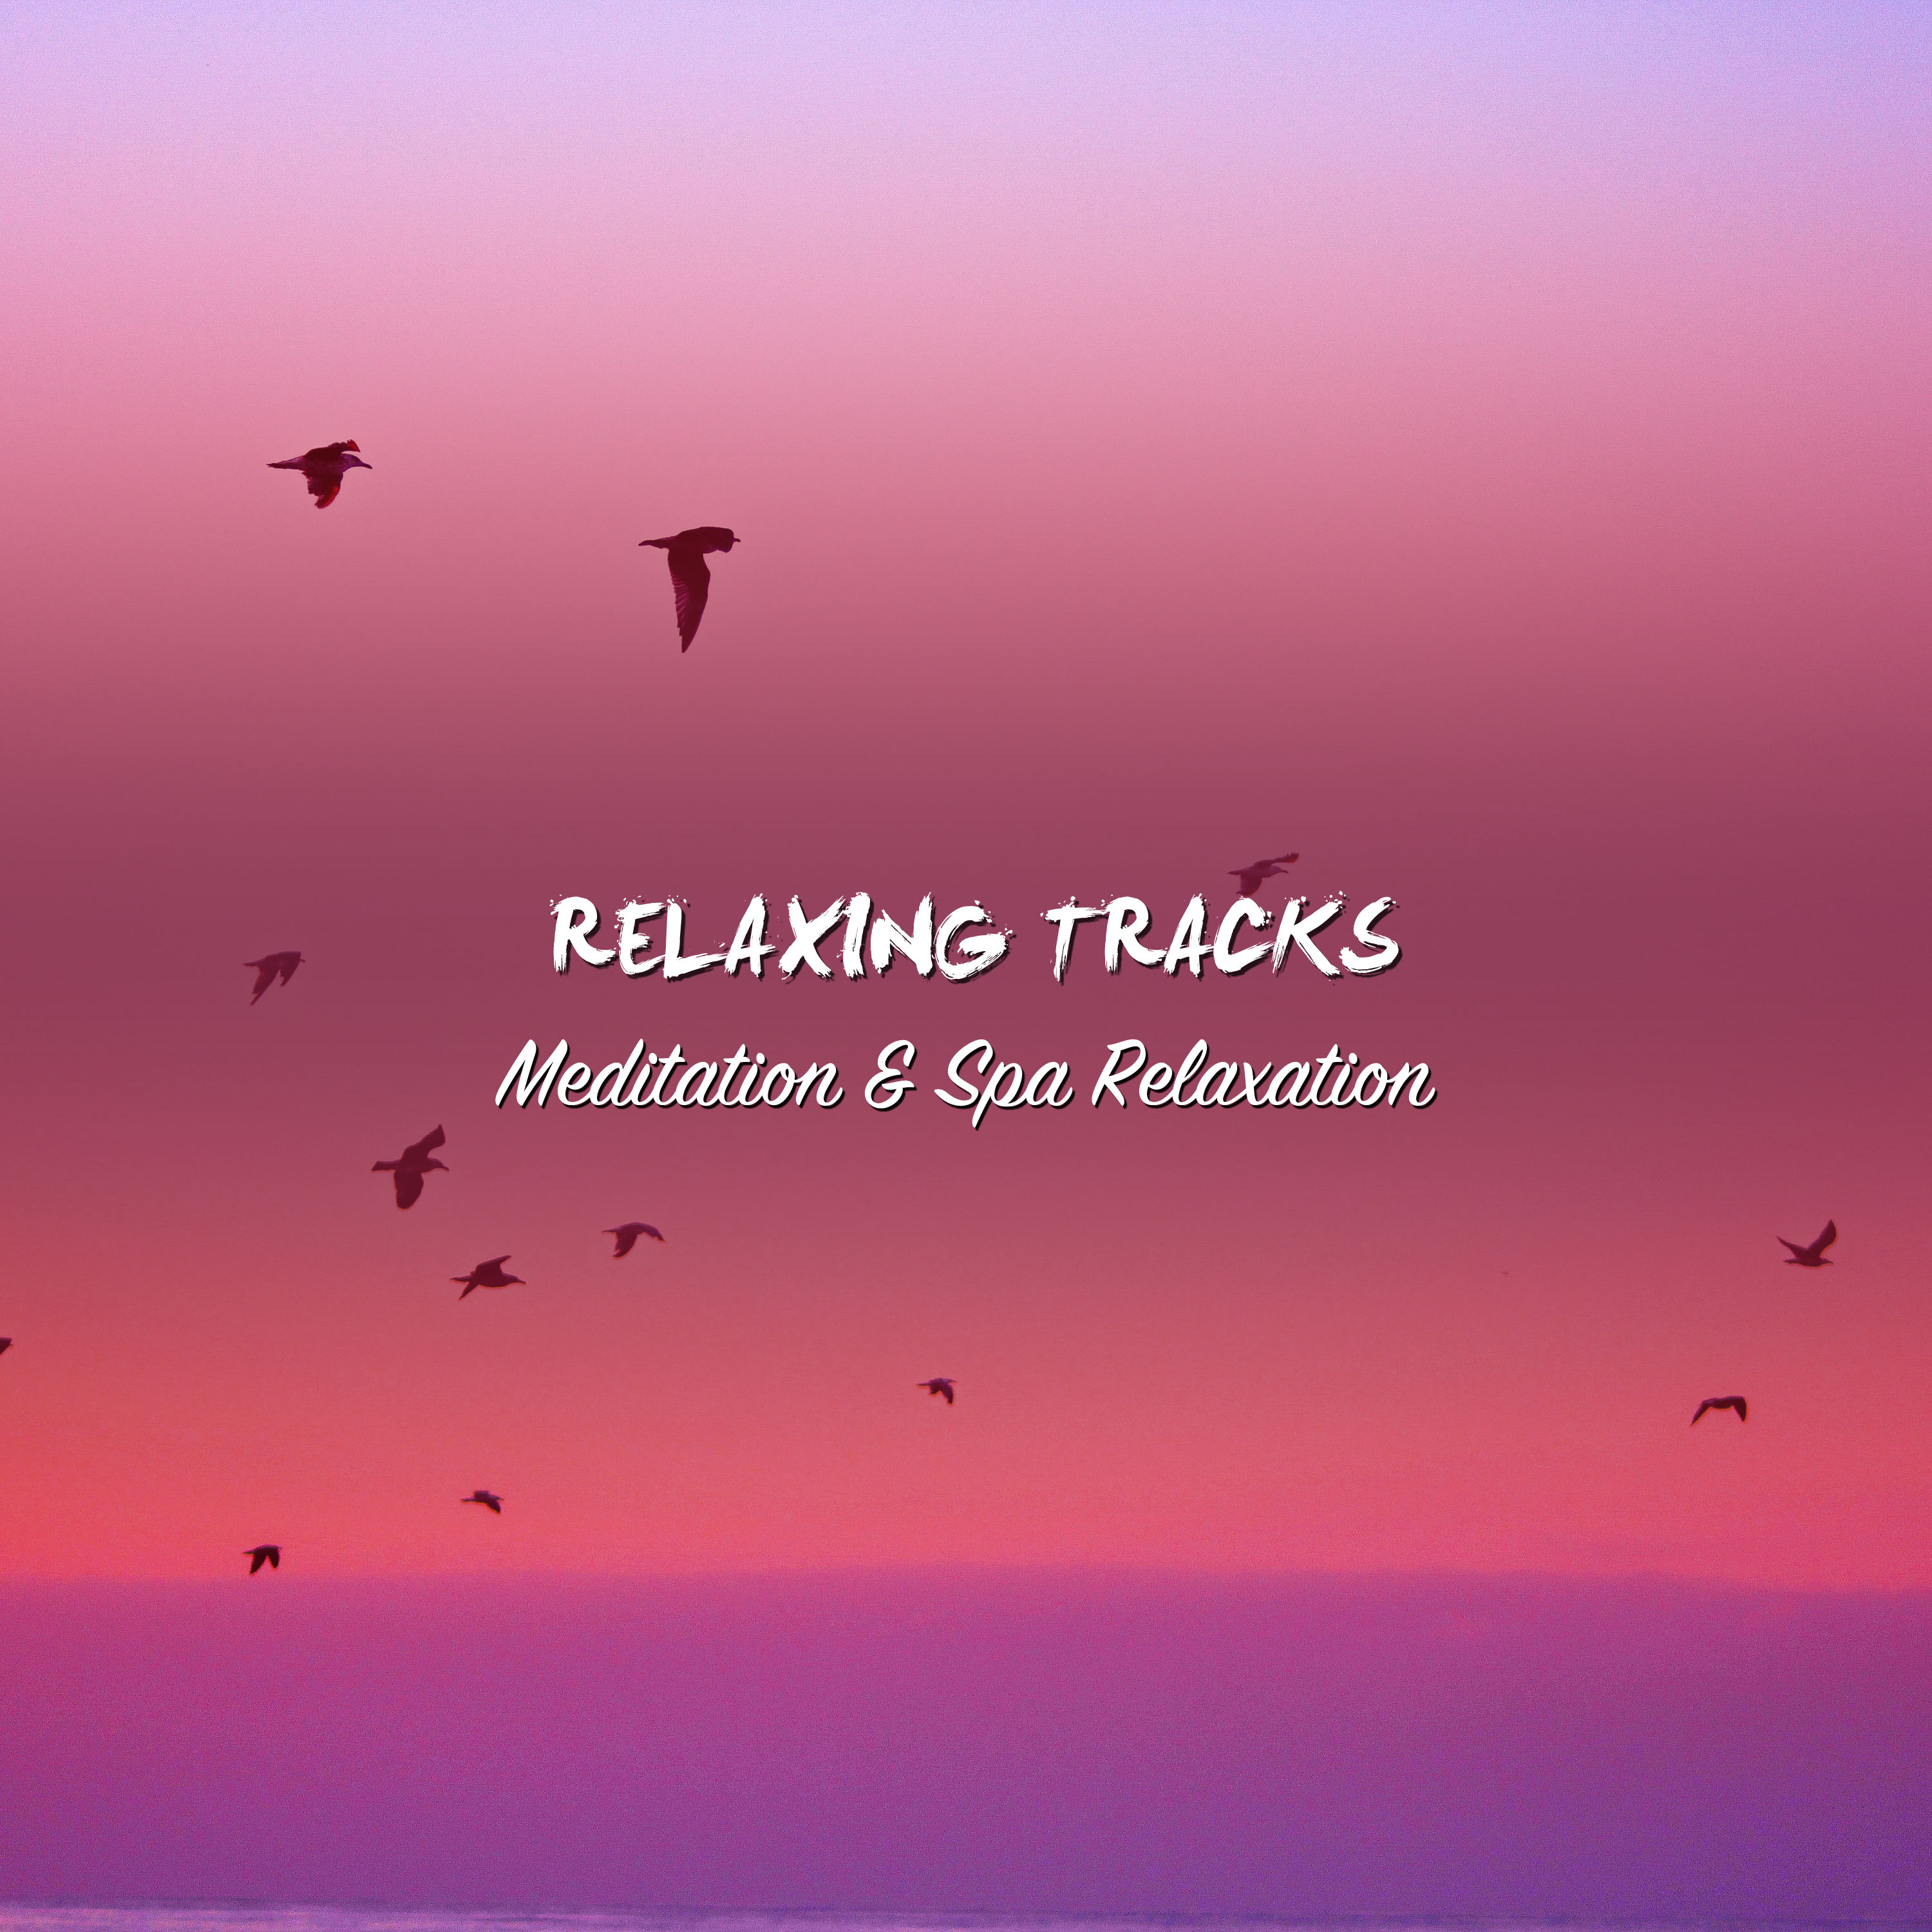 15 Relaxing Tracks for Mediation and Spa Relaxation